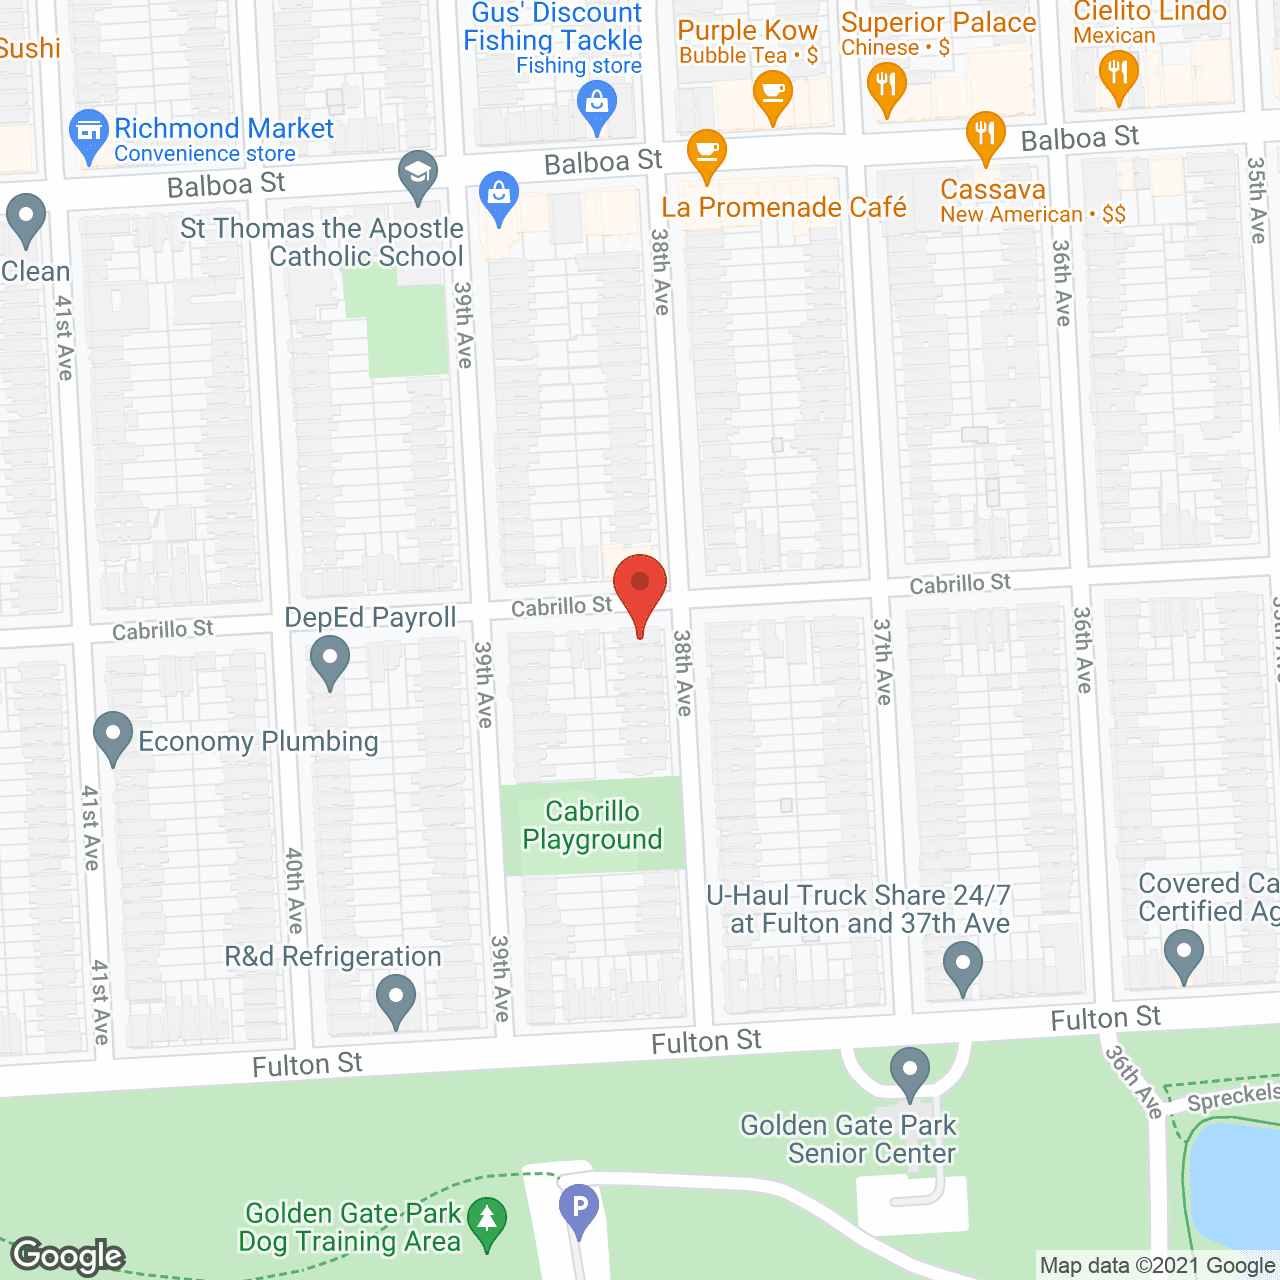 Farol's Residential Care Home #1 in google map